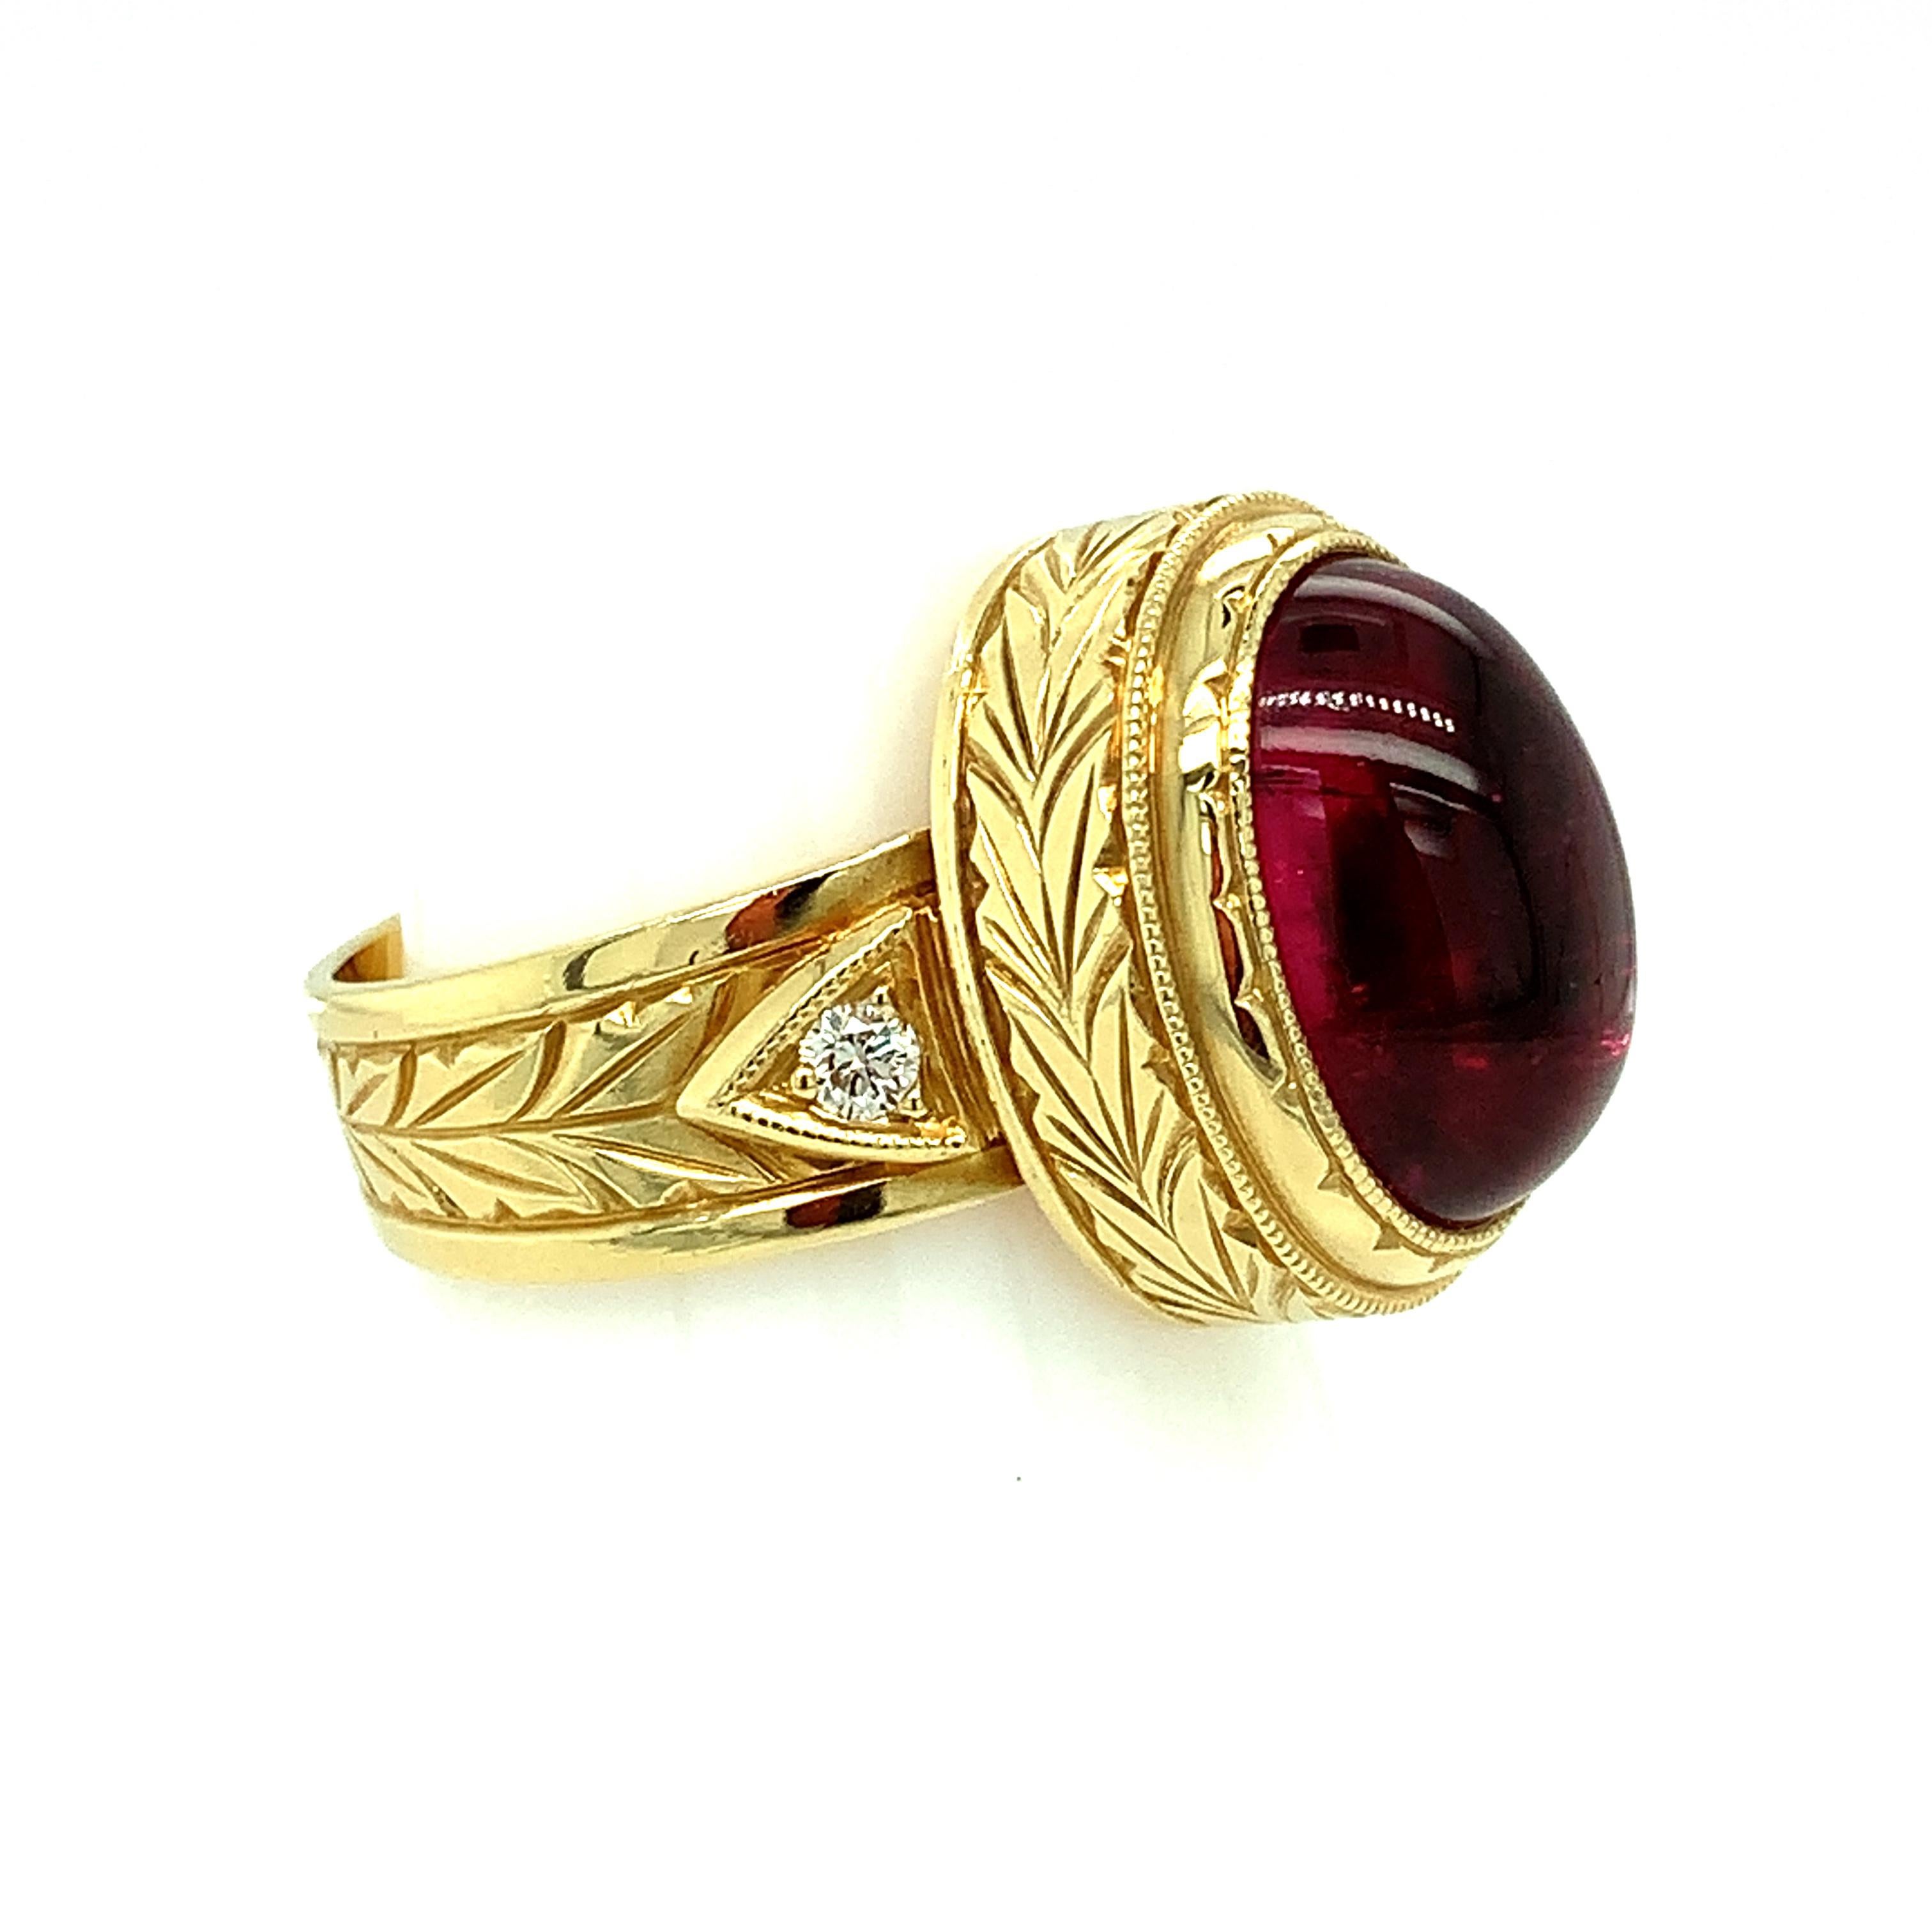 7.47 Carat Rubellite Tourmaline Cabochon and Diamond Band Ring in Yellow Gold For Sale 1